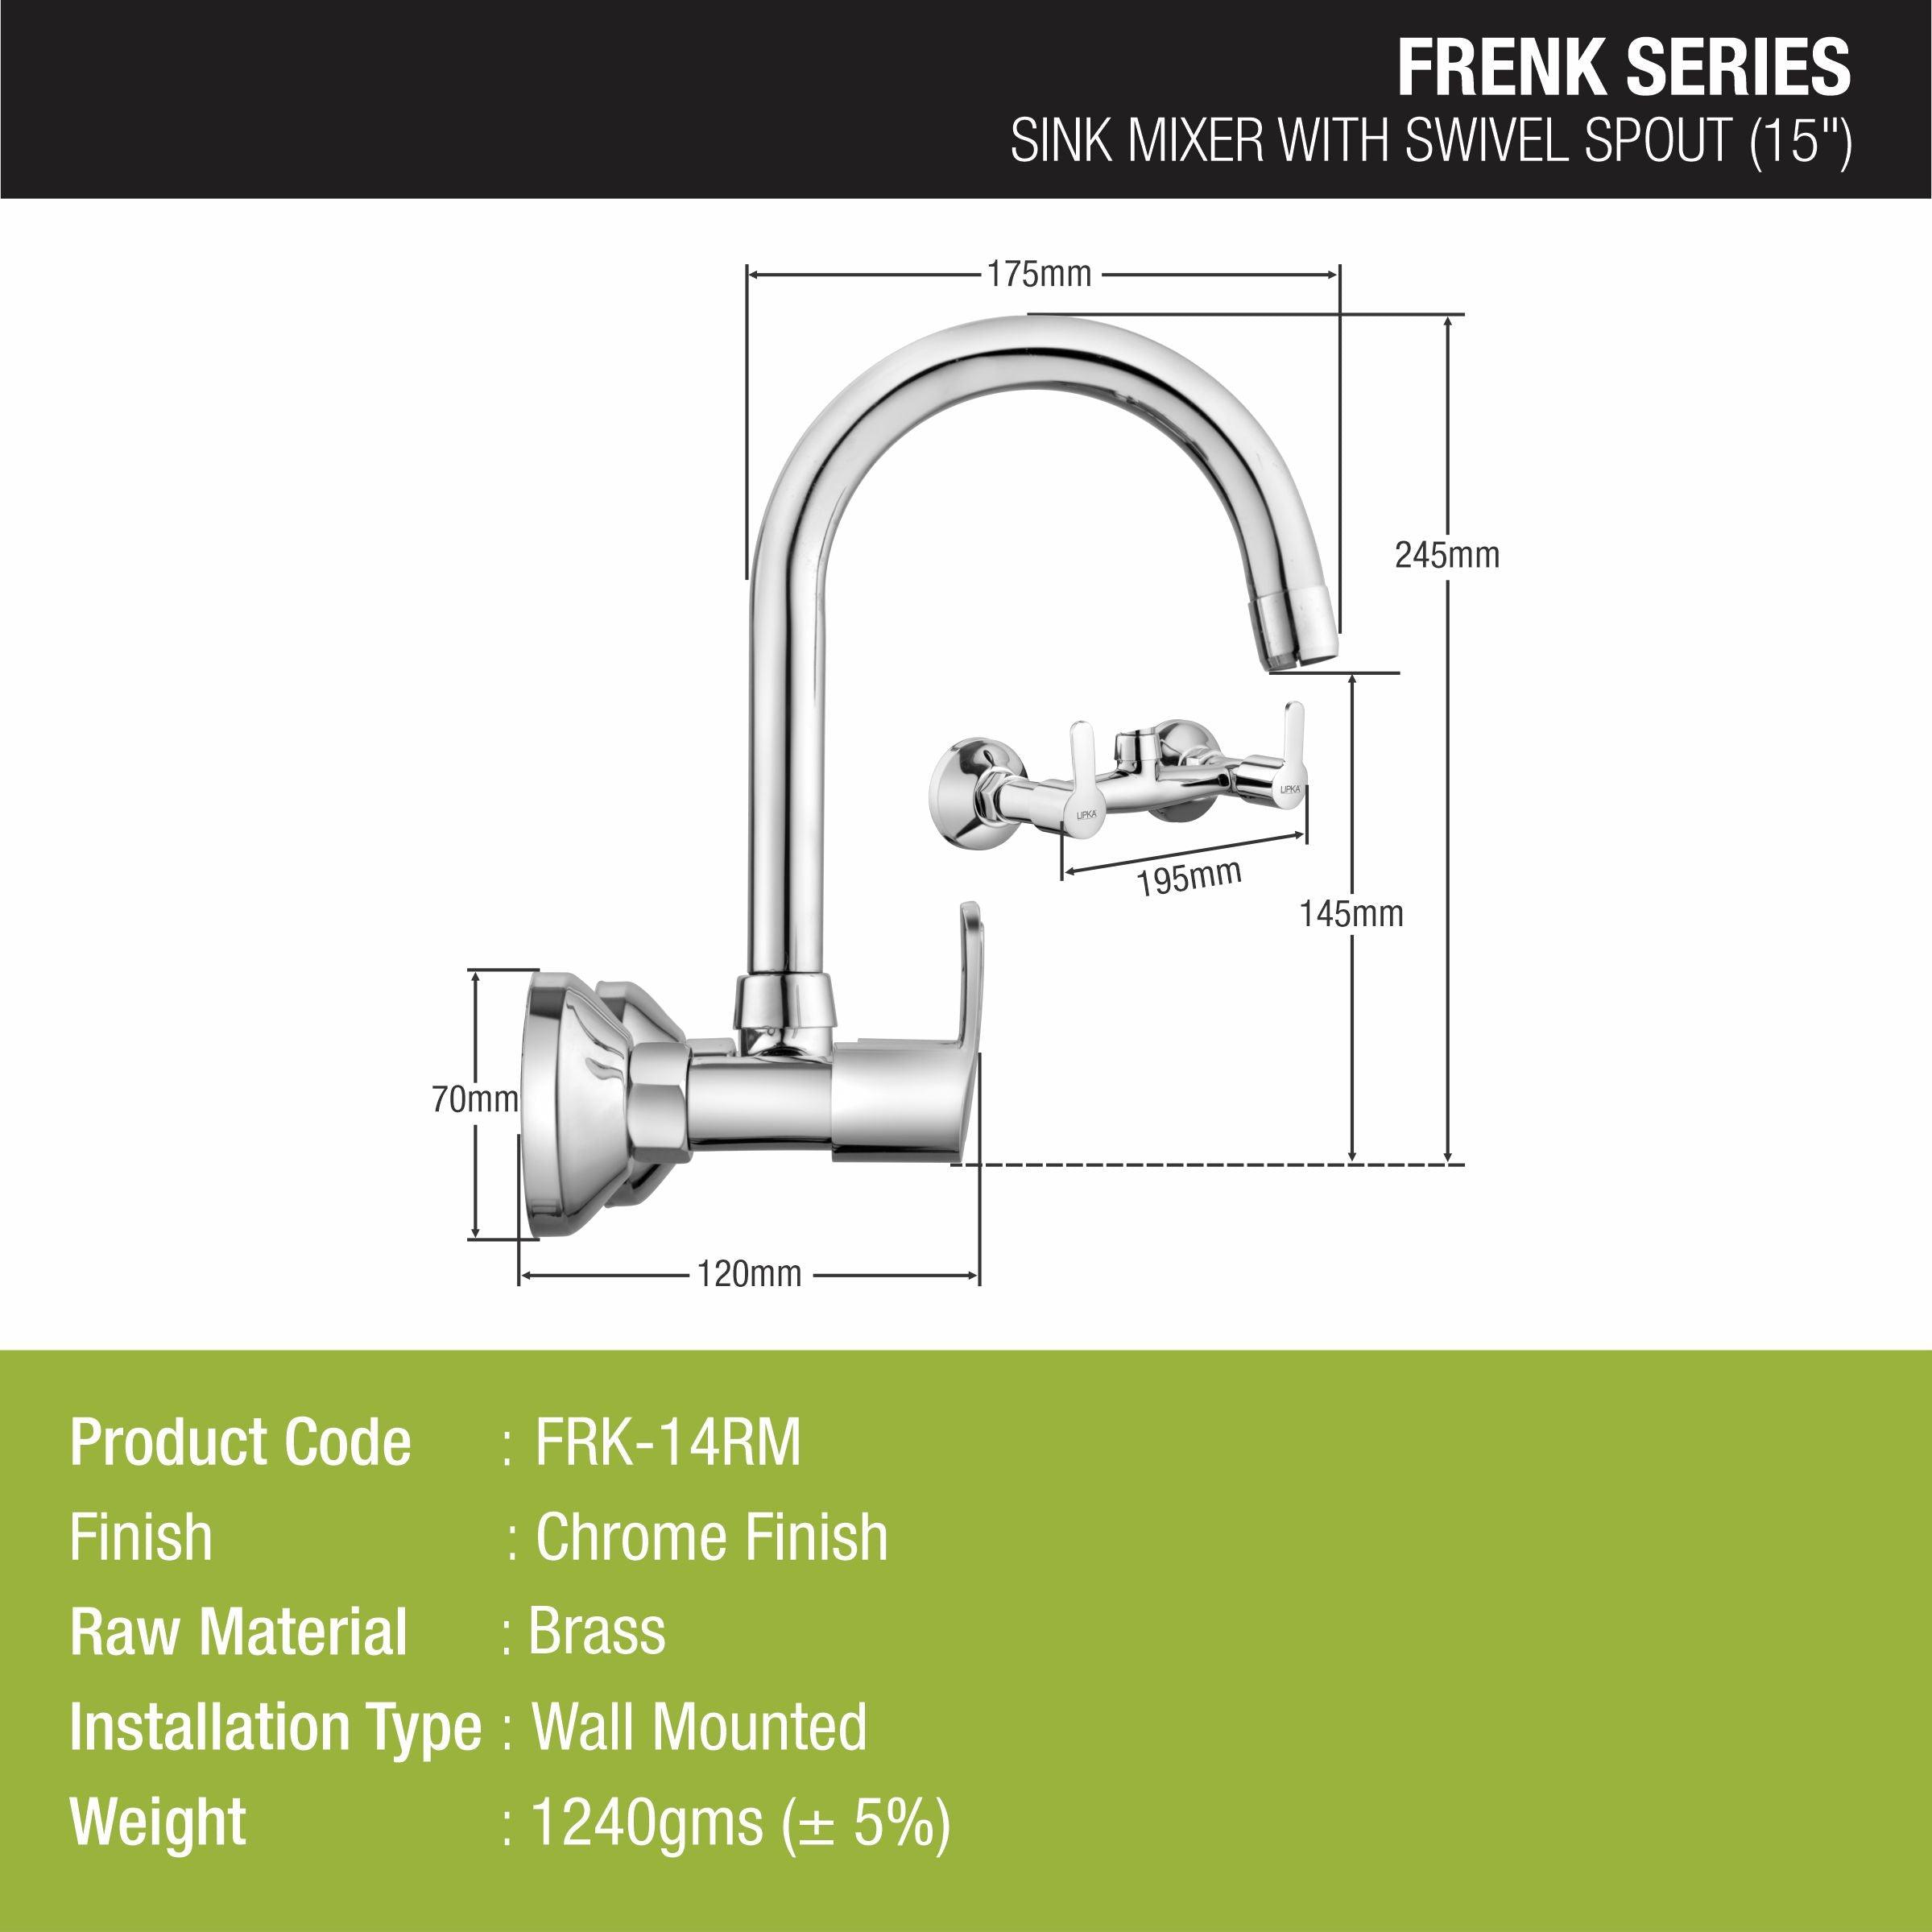 Frenk Sink Mixer Brass Faucet with Round Swivel Spout (15 Inches) sizes and dimensions